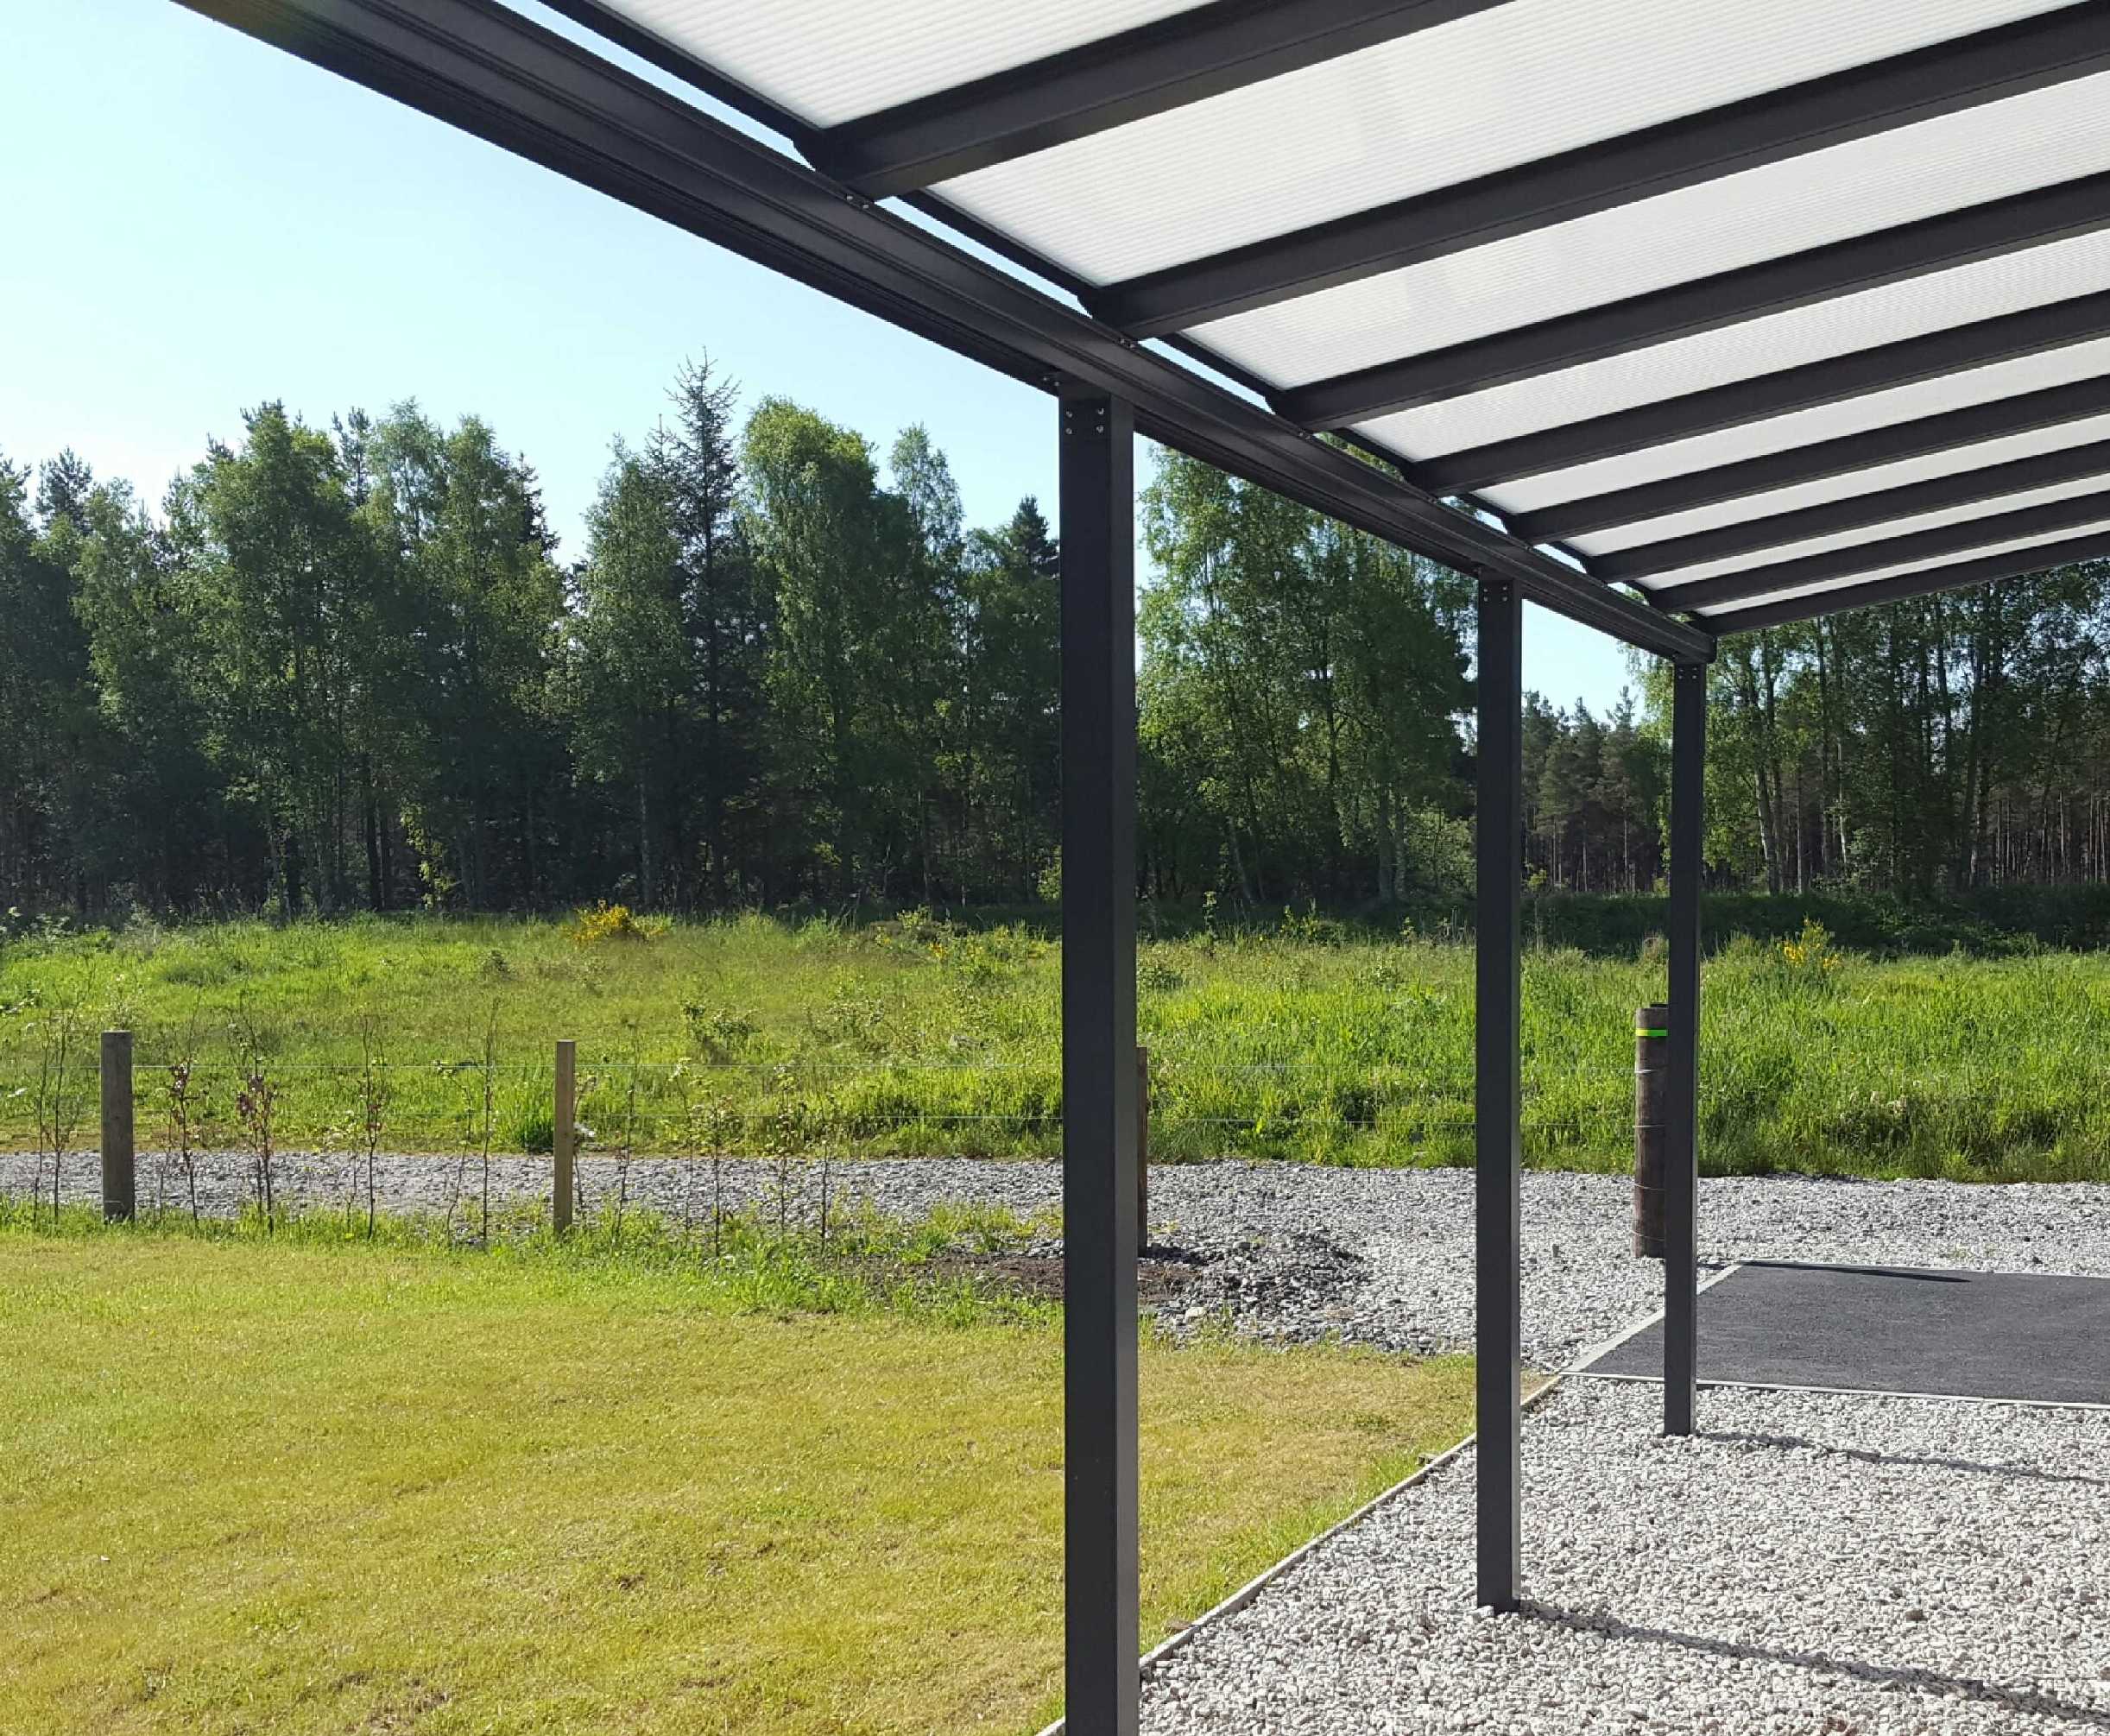 Omega Smart Lean-To Canopy, Anthracite Grey, 16mm Polycarbonate Glazing - 7.0m (W) x 3.5m (P), (4) Supporting Posts